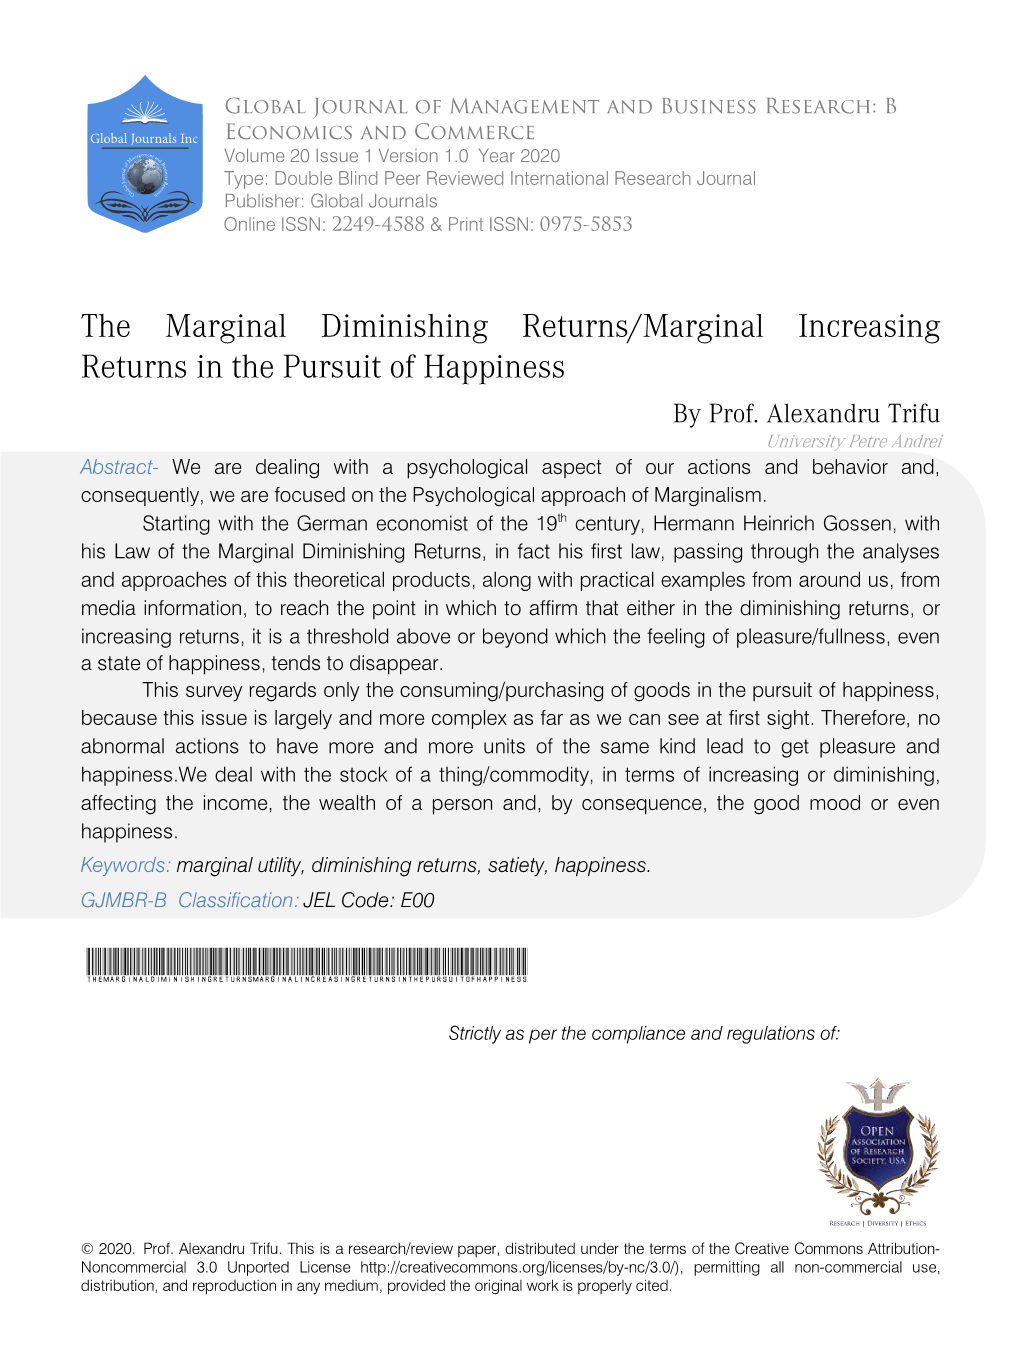 The Marginal Diminishing Returns/Marginal Increasing Returns in the Pursuit of Happiness by Prof